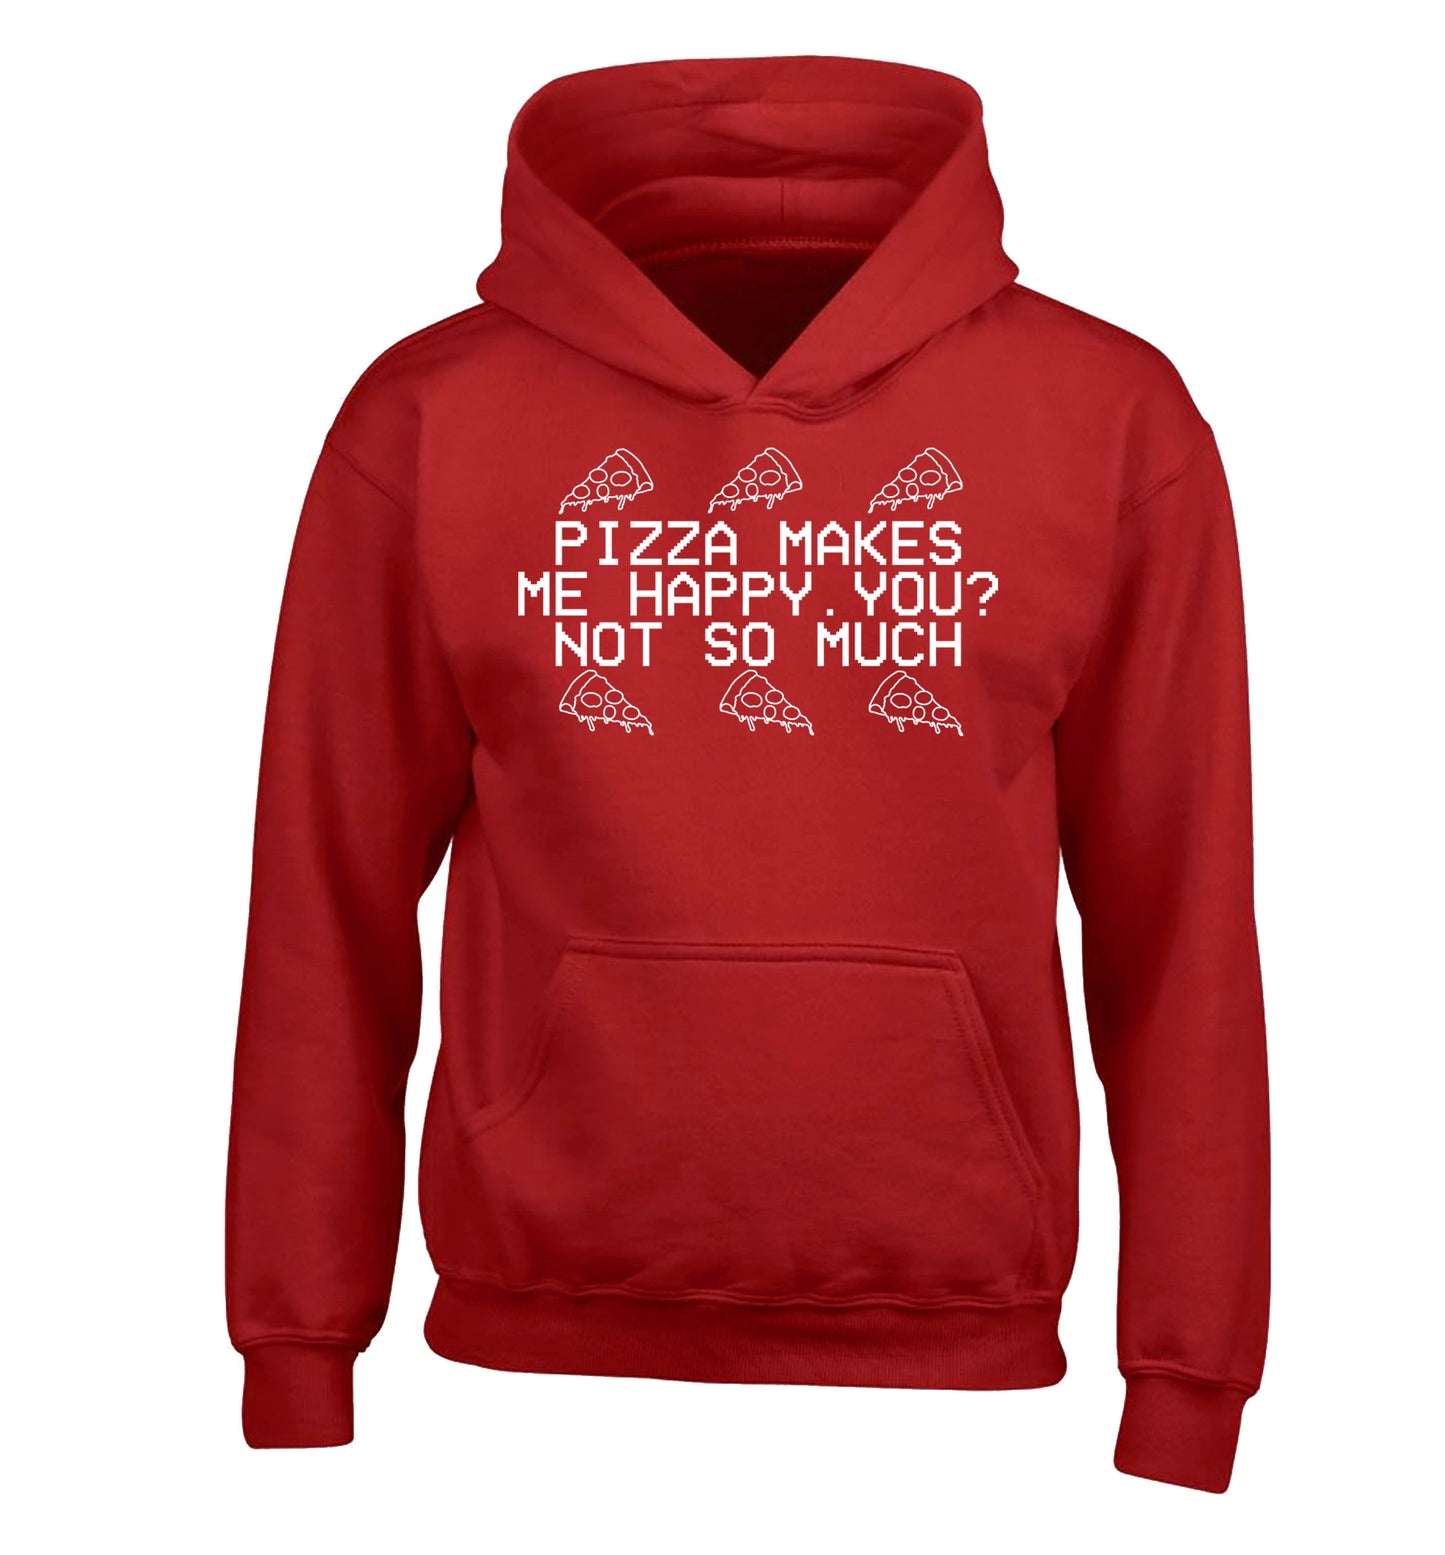 Pizza makes me happy, You? Not so much children's red hoodie 12-14 Years